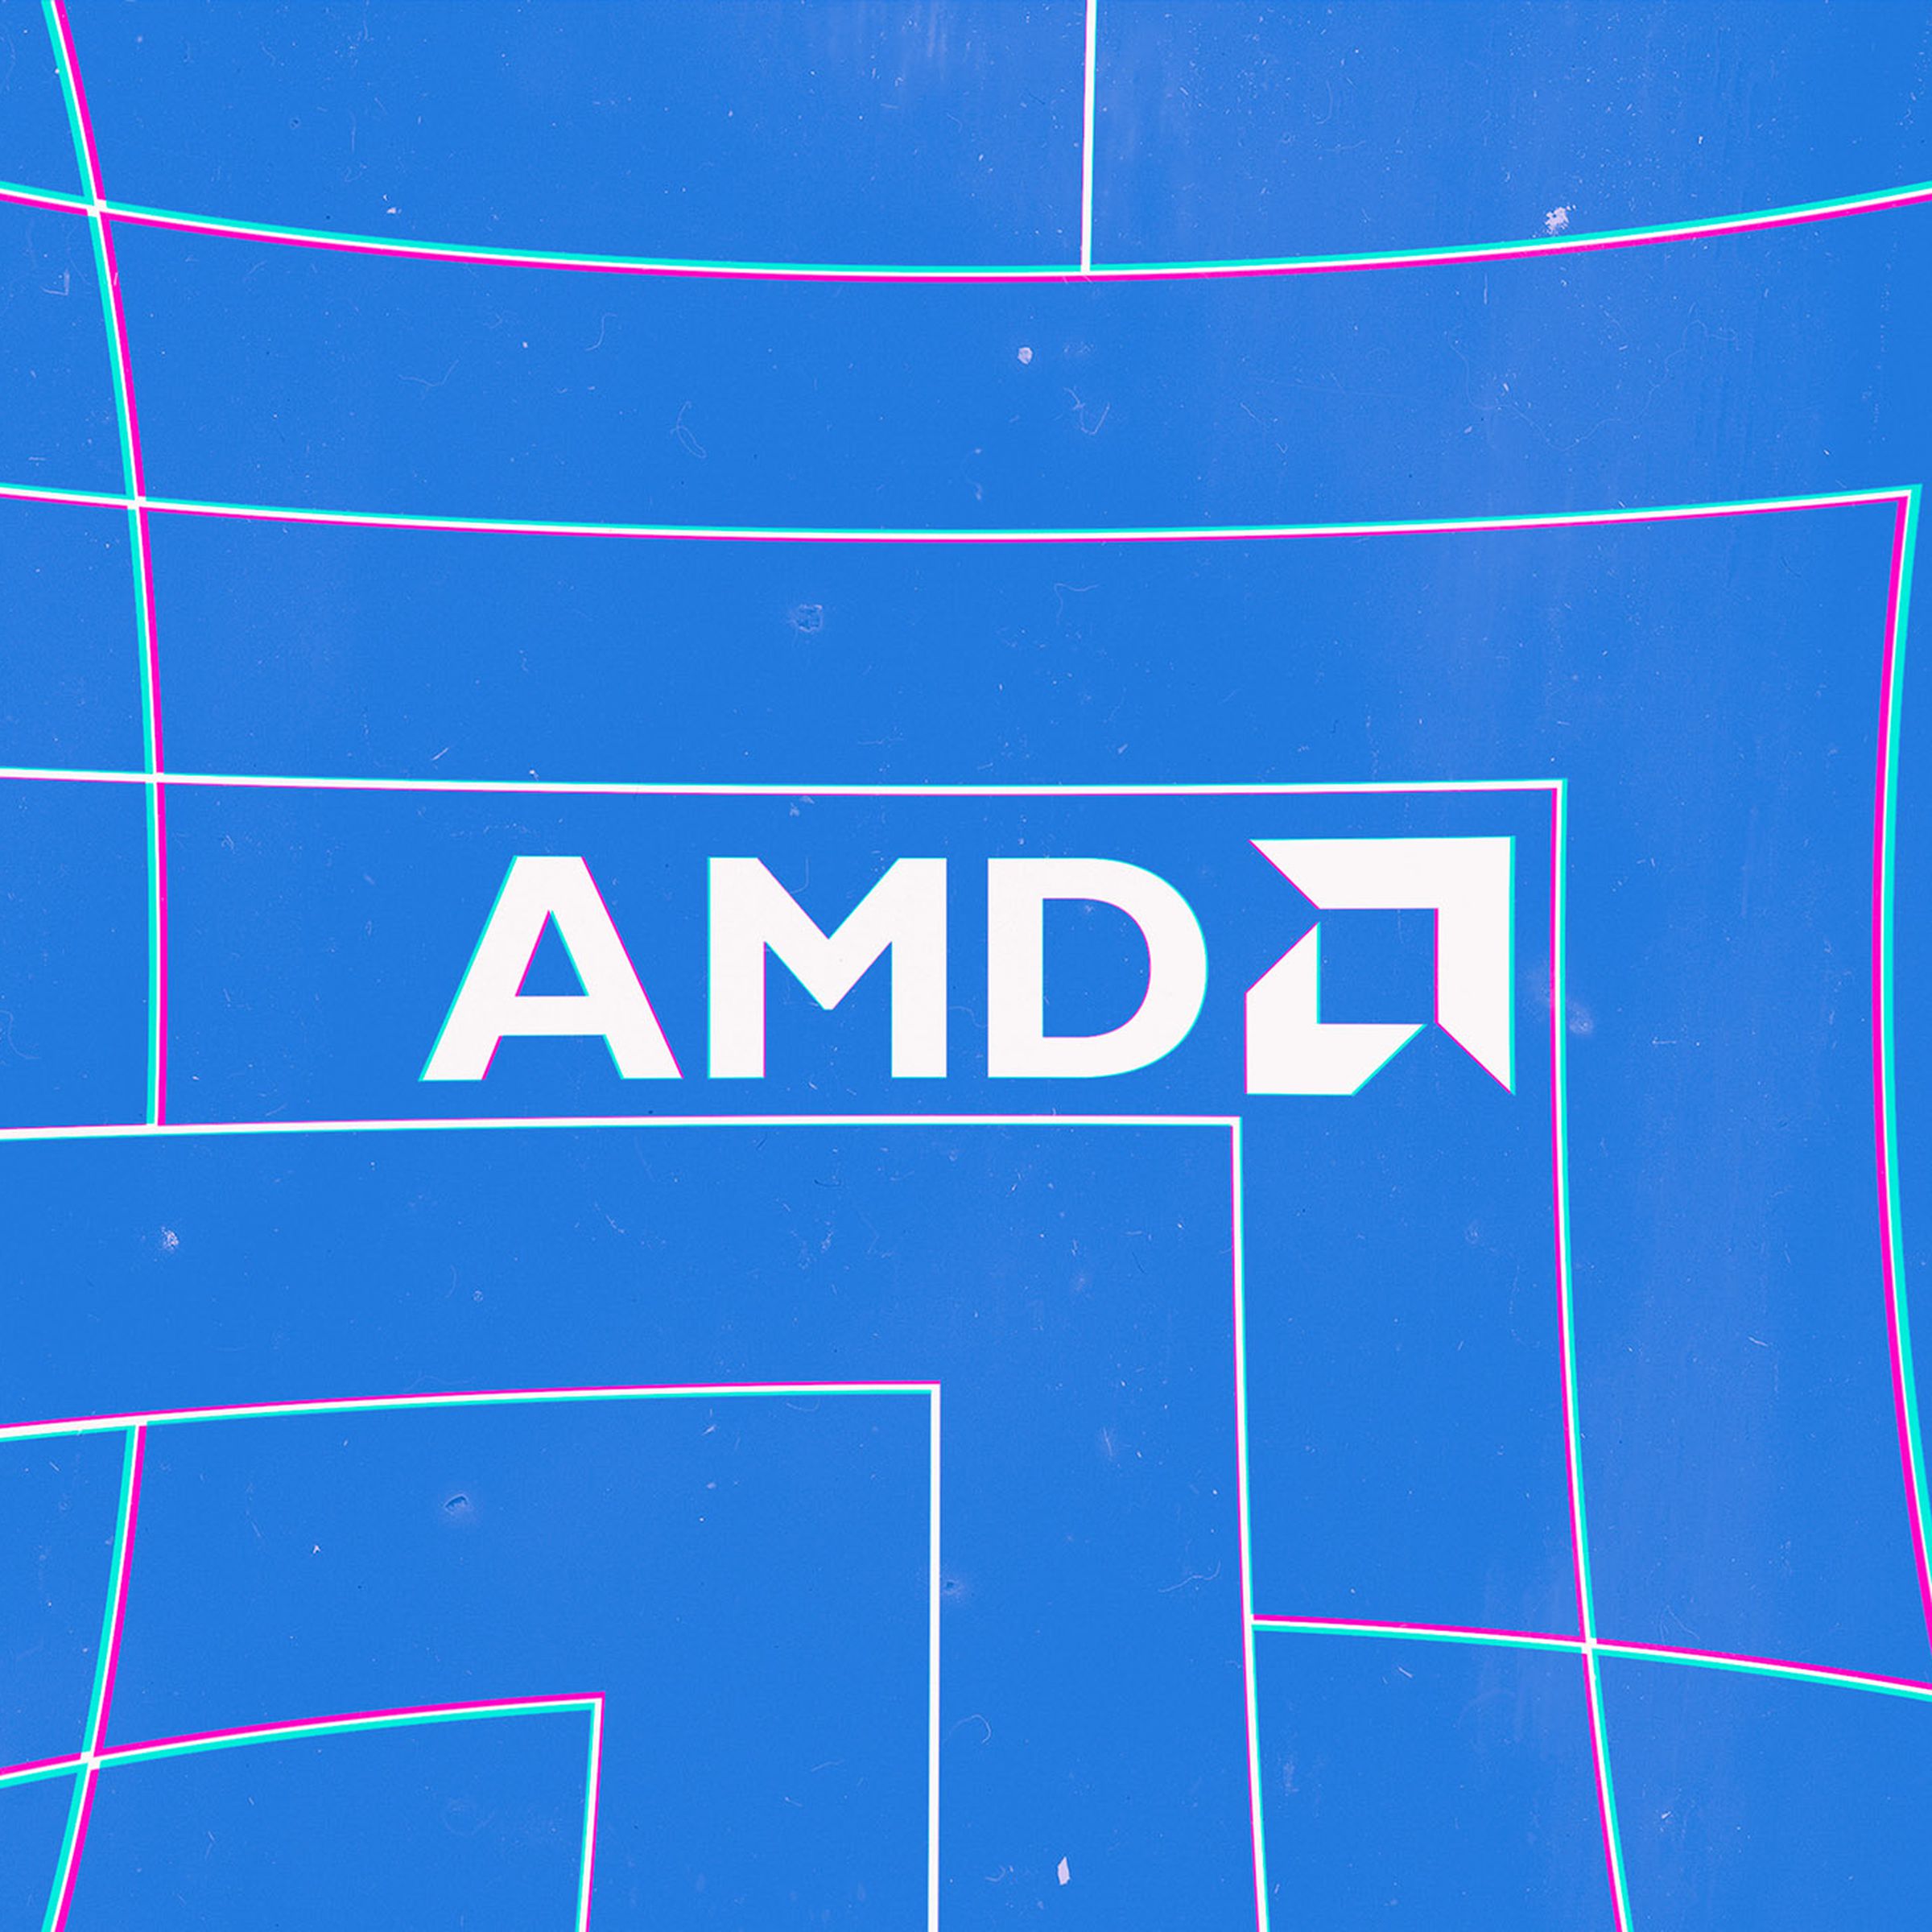 An image showing the AMD logo on a blue background